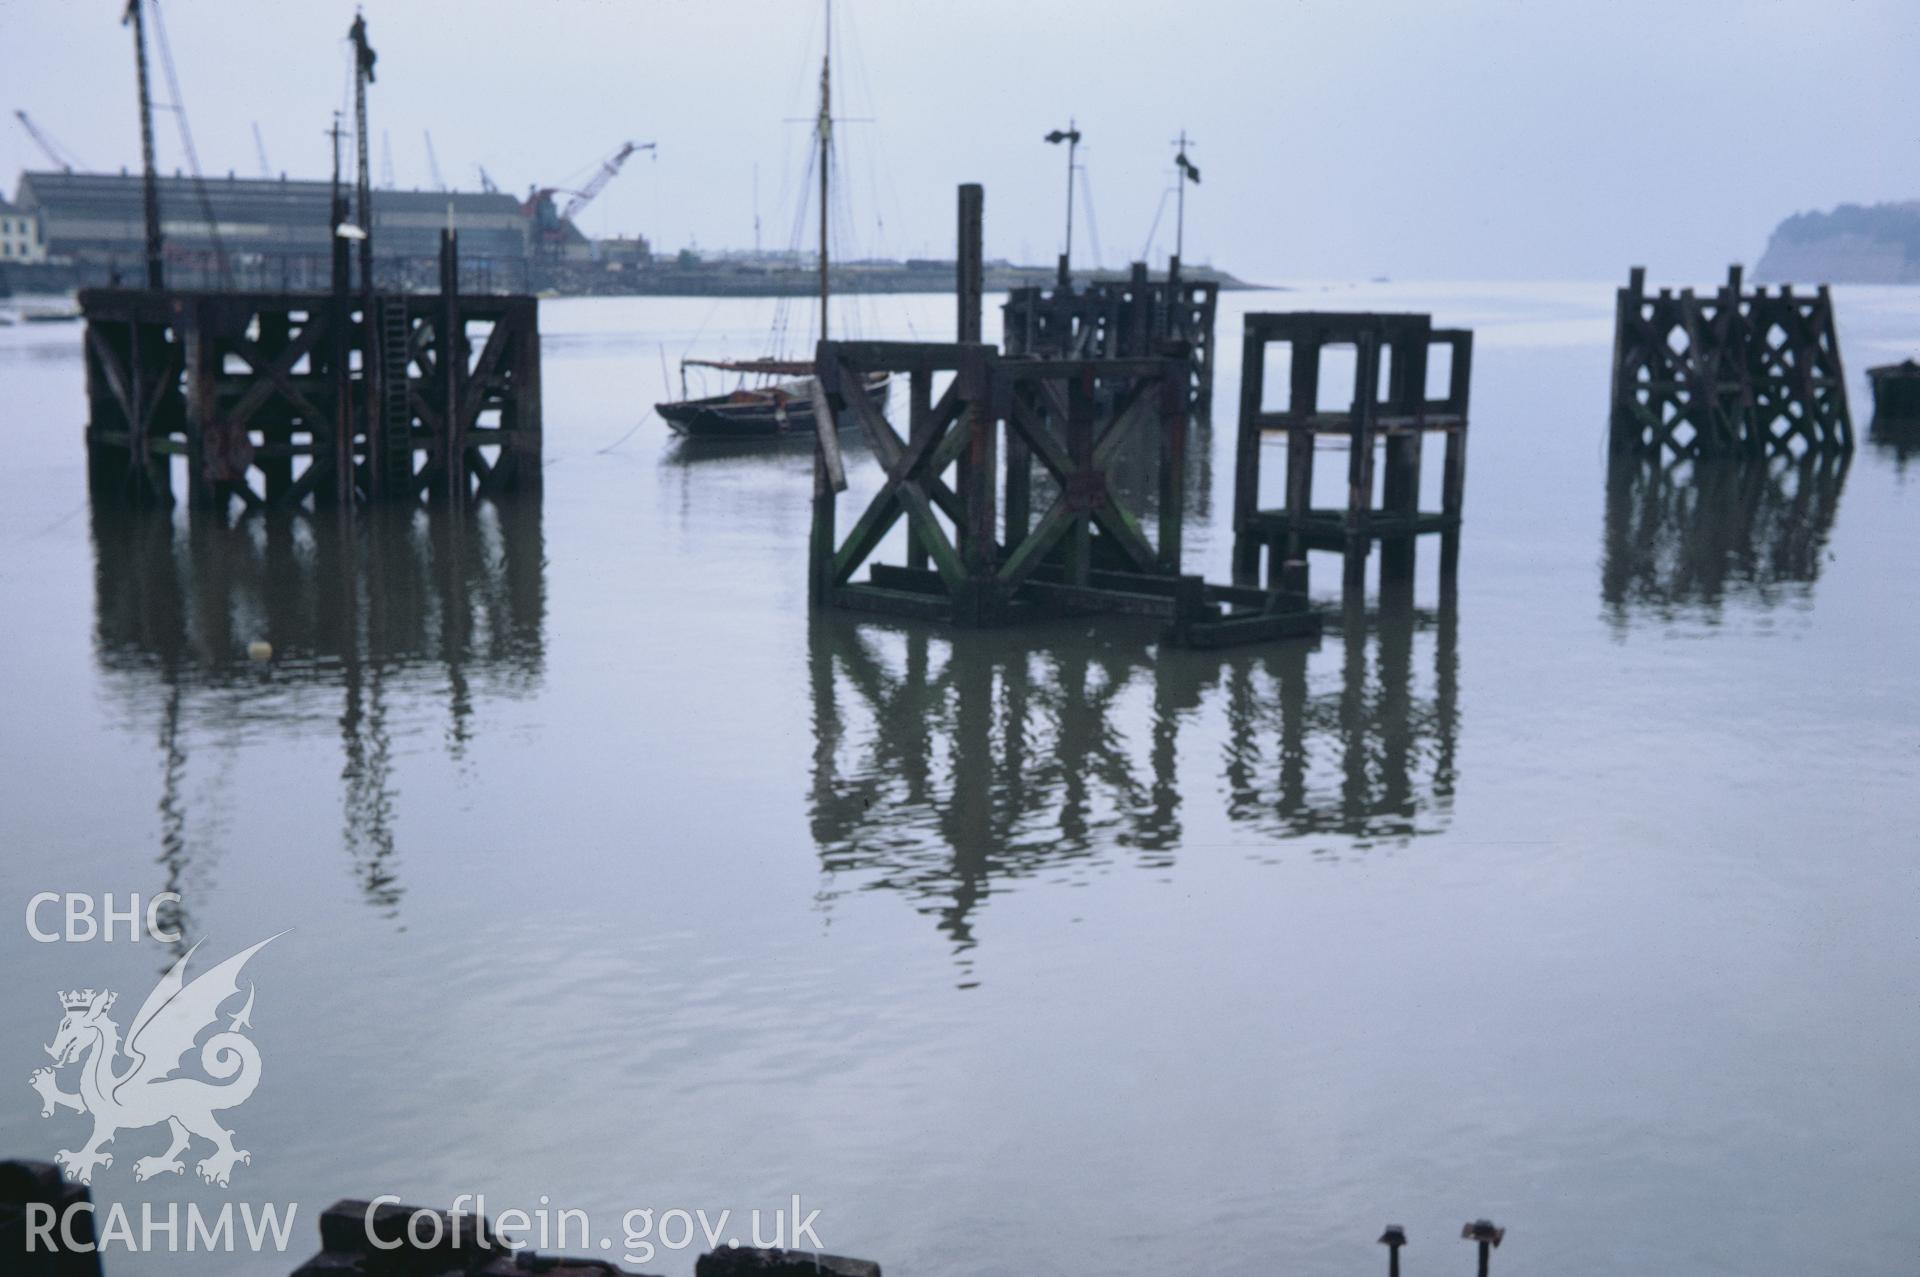 35mm colour slide showing  'dolphins' at Cardiff Docks, Cardiff, Glamorgan by Dylan Roberts.